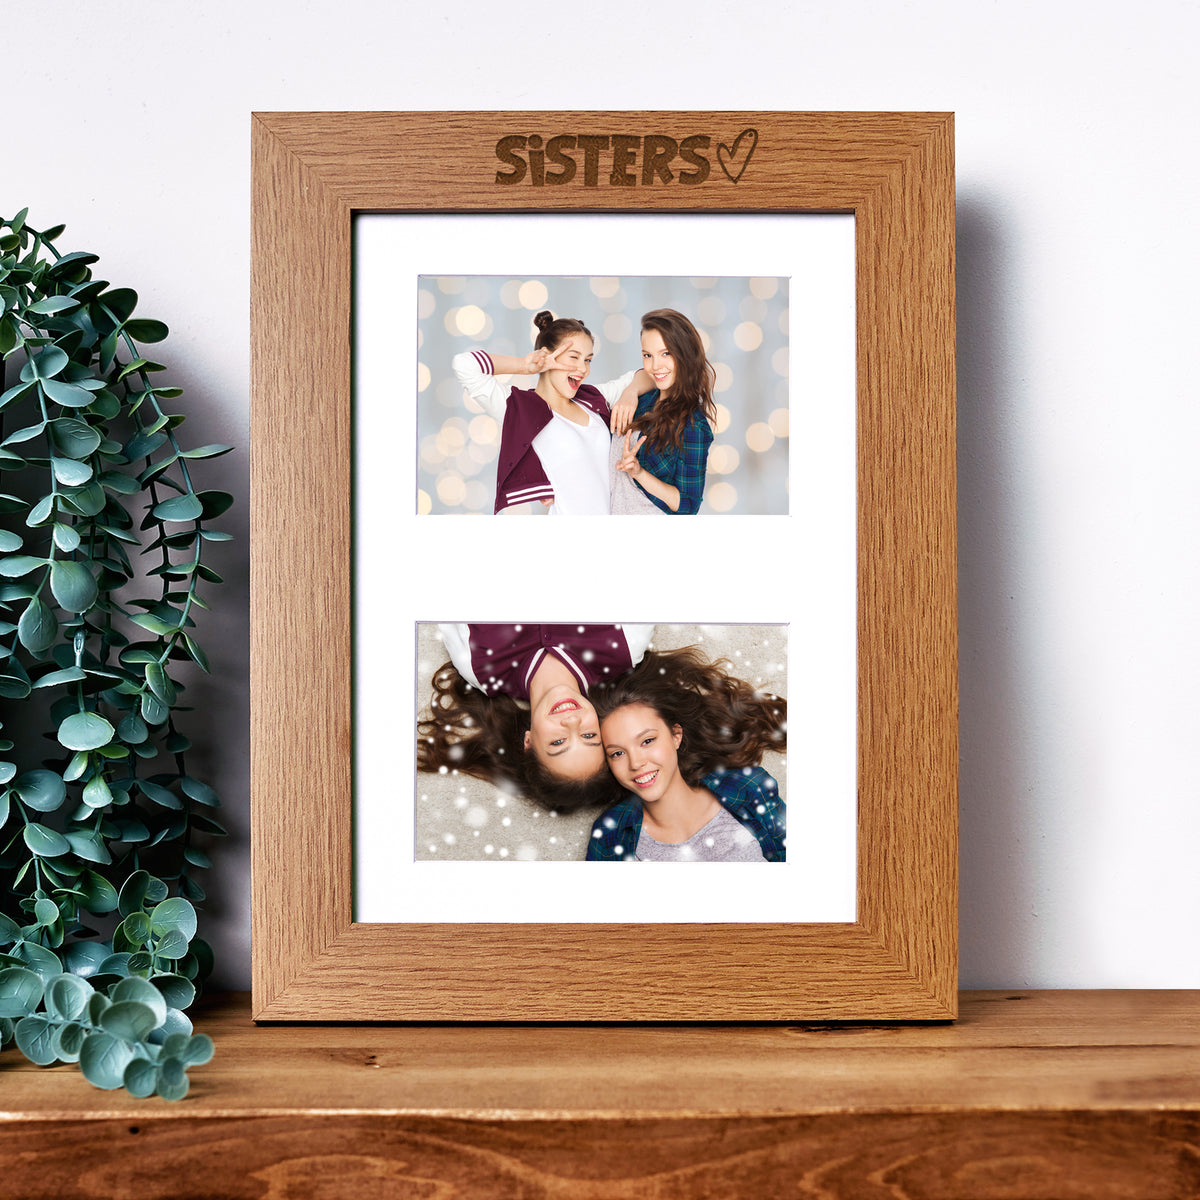 Sisters Photo Picture Frame Double 6x4 Inch Landscape